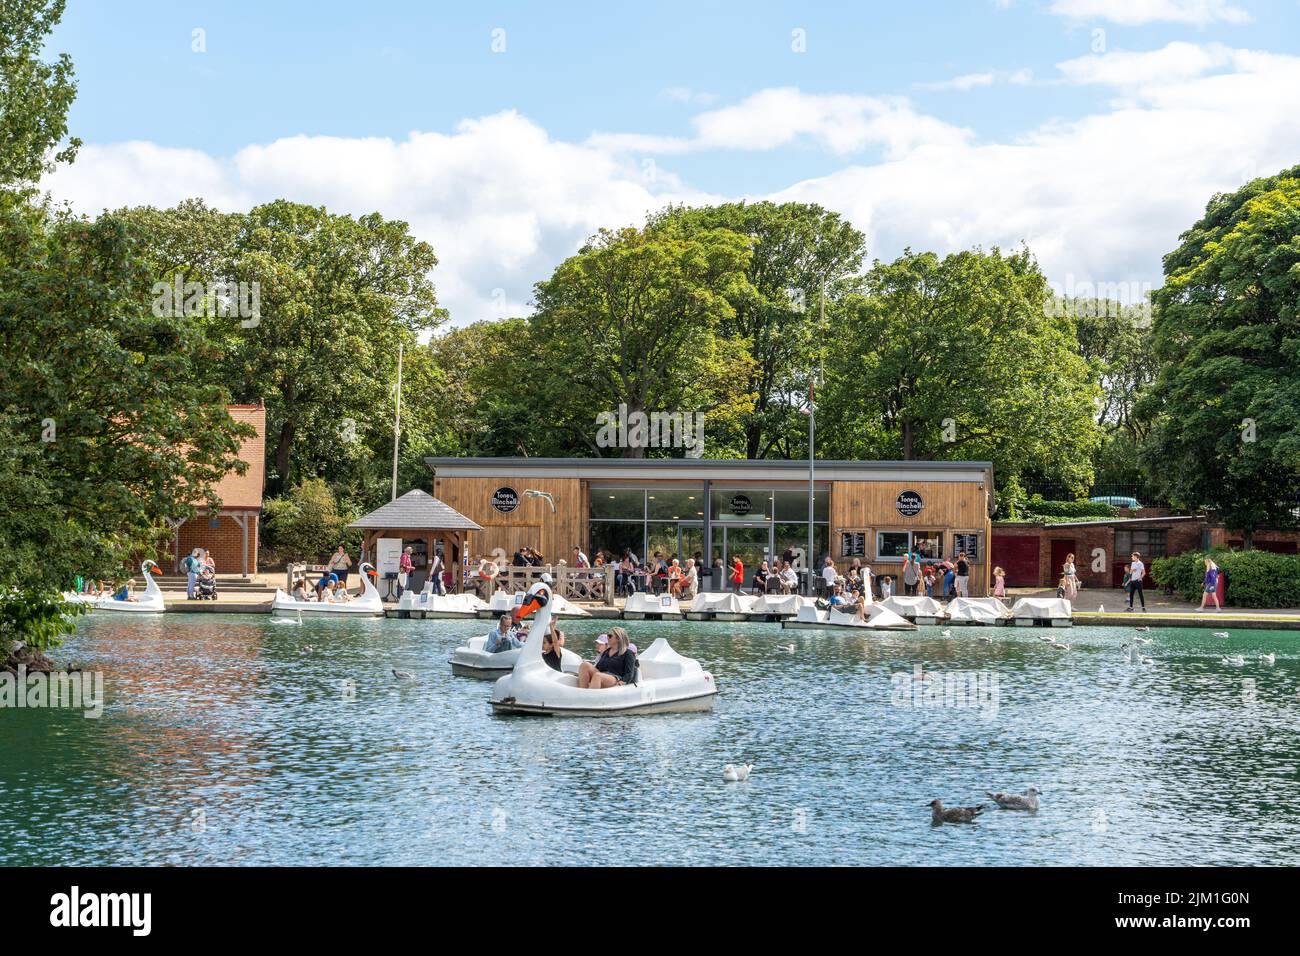 A view of the boating lake at South Marine Park, South Shields, South Tyneside, UK, with swan pedalos and Tony Minchella's cafe. Stock Photo